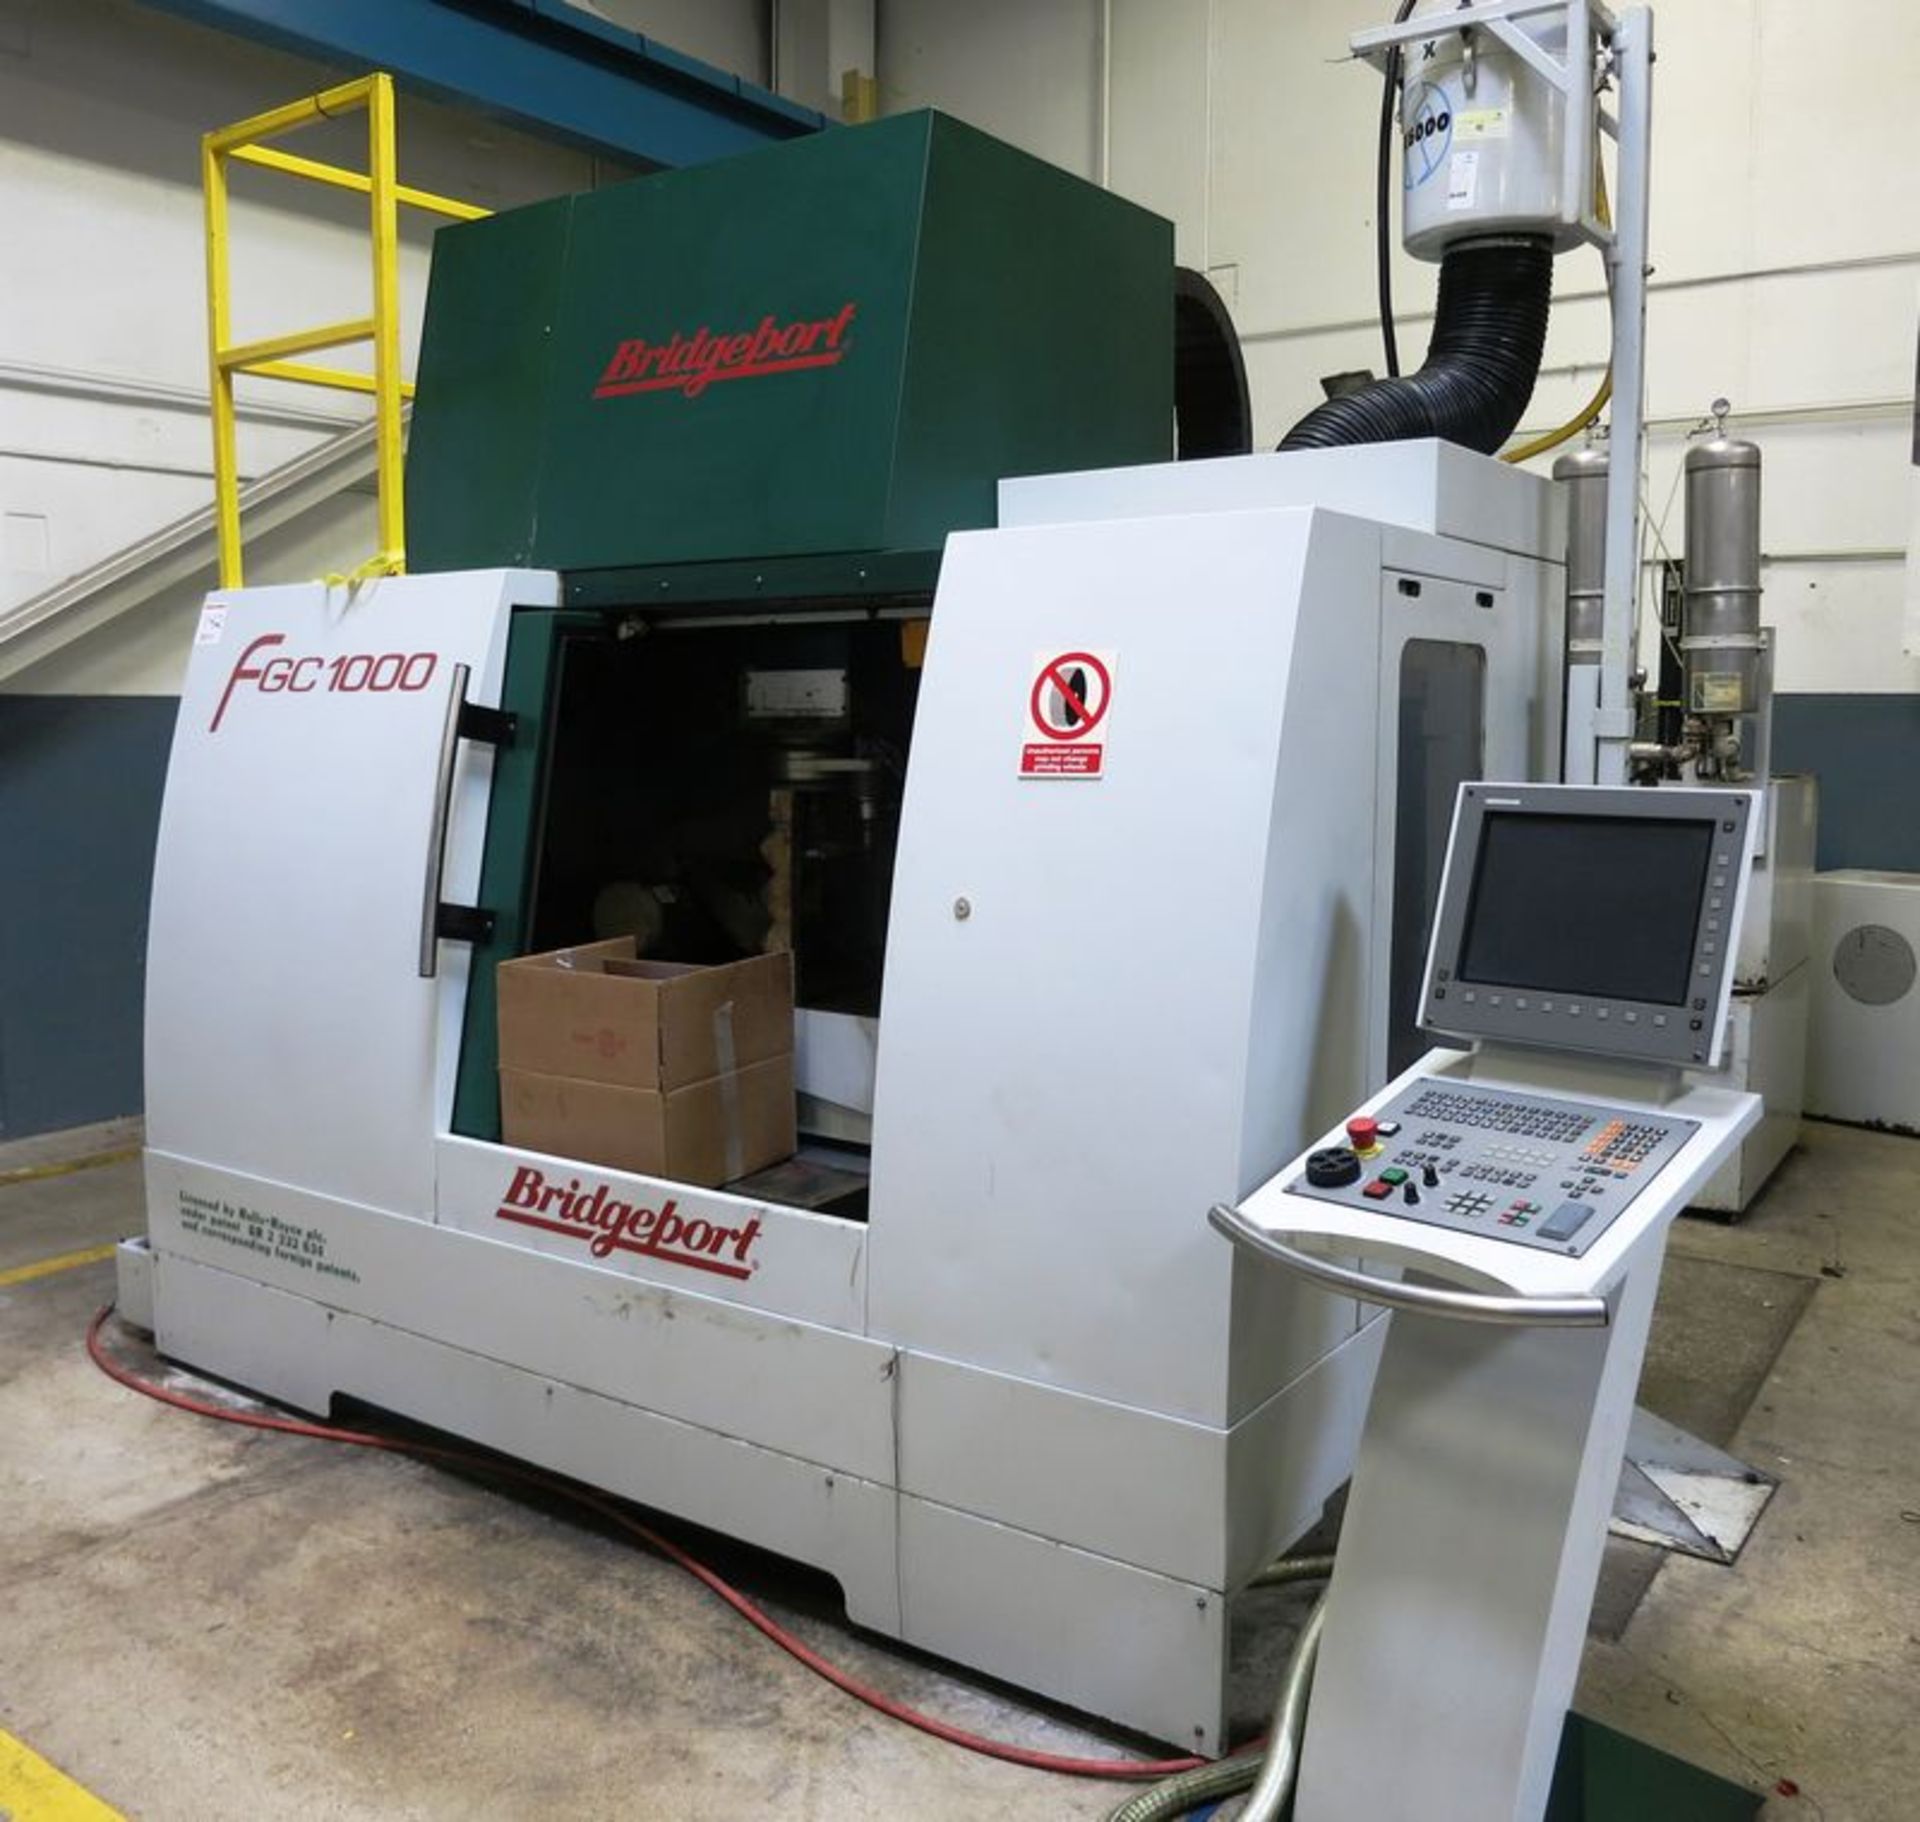 Bridgeport FGC-1000 5-Axis Vertical machining and Flexible Grinding Center for Turbine Blades, S/N